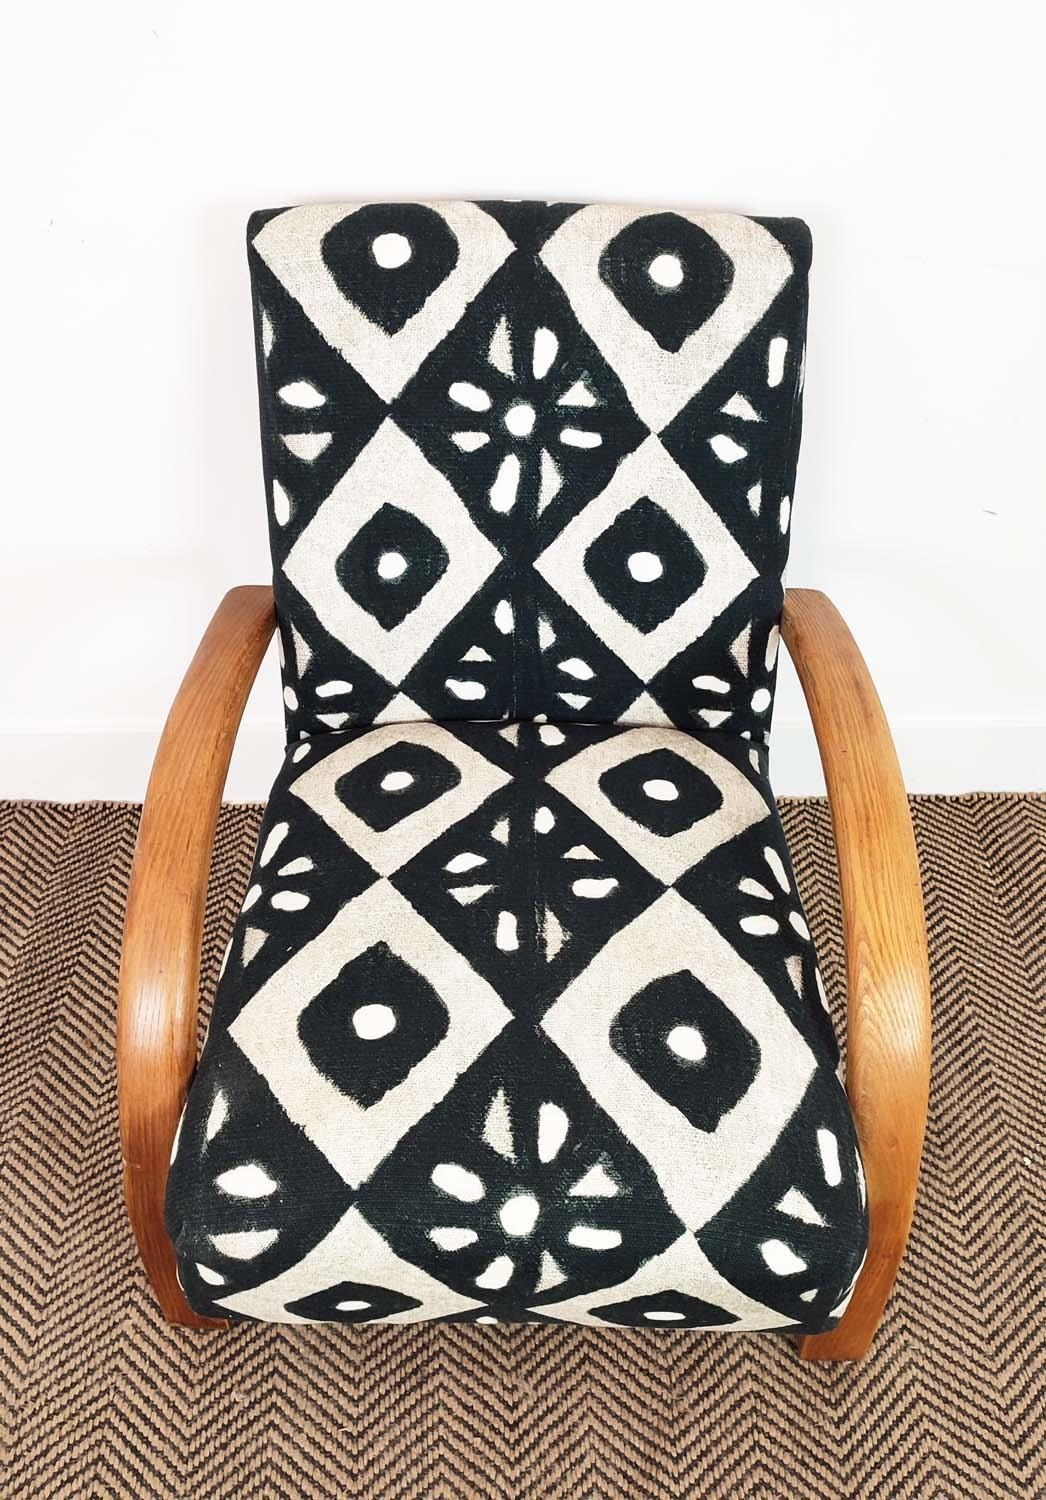 HALBALA ARMCHAIR, mid 20th century bentwood in black and white geometric material, 77cm H x 60cm W x - Image 4 of 10